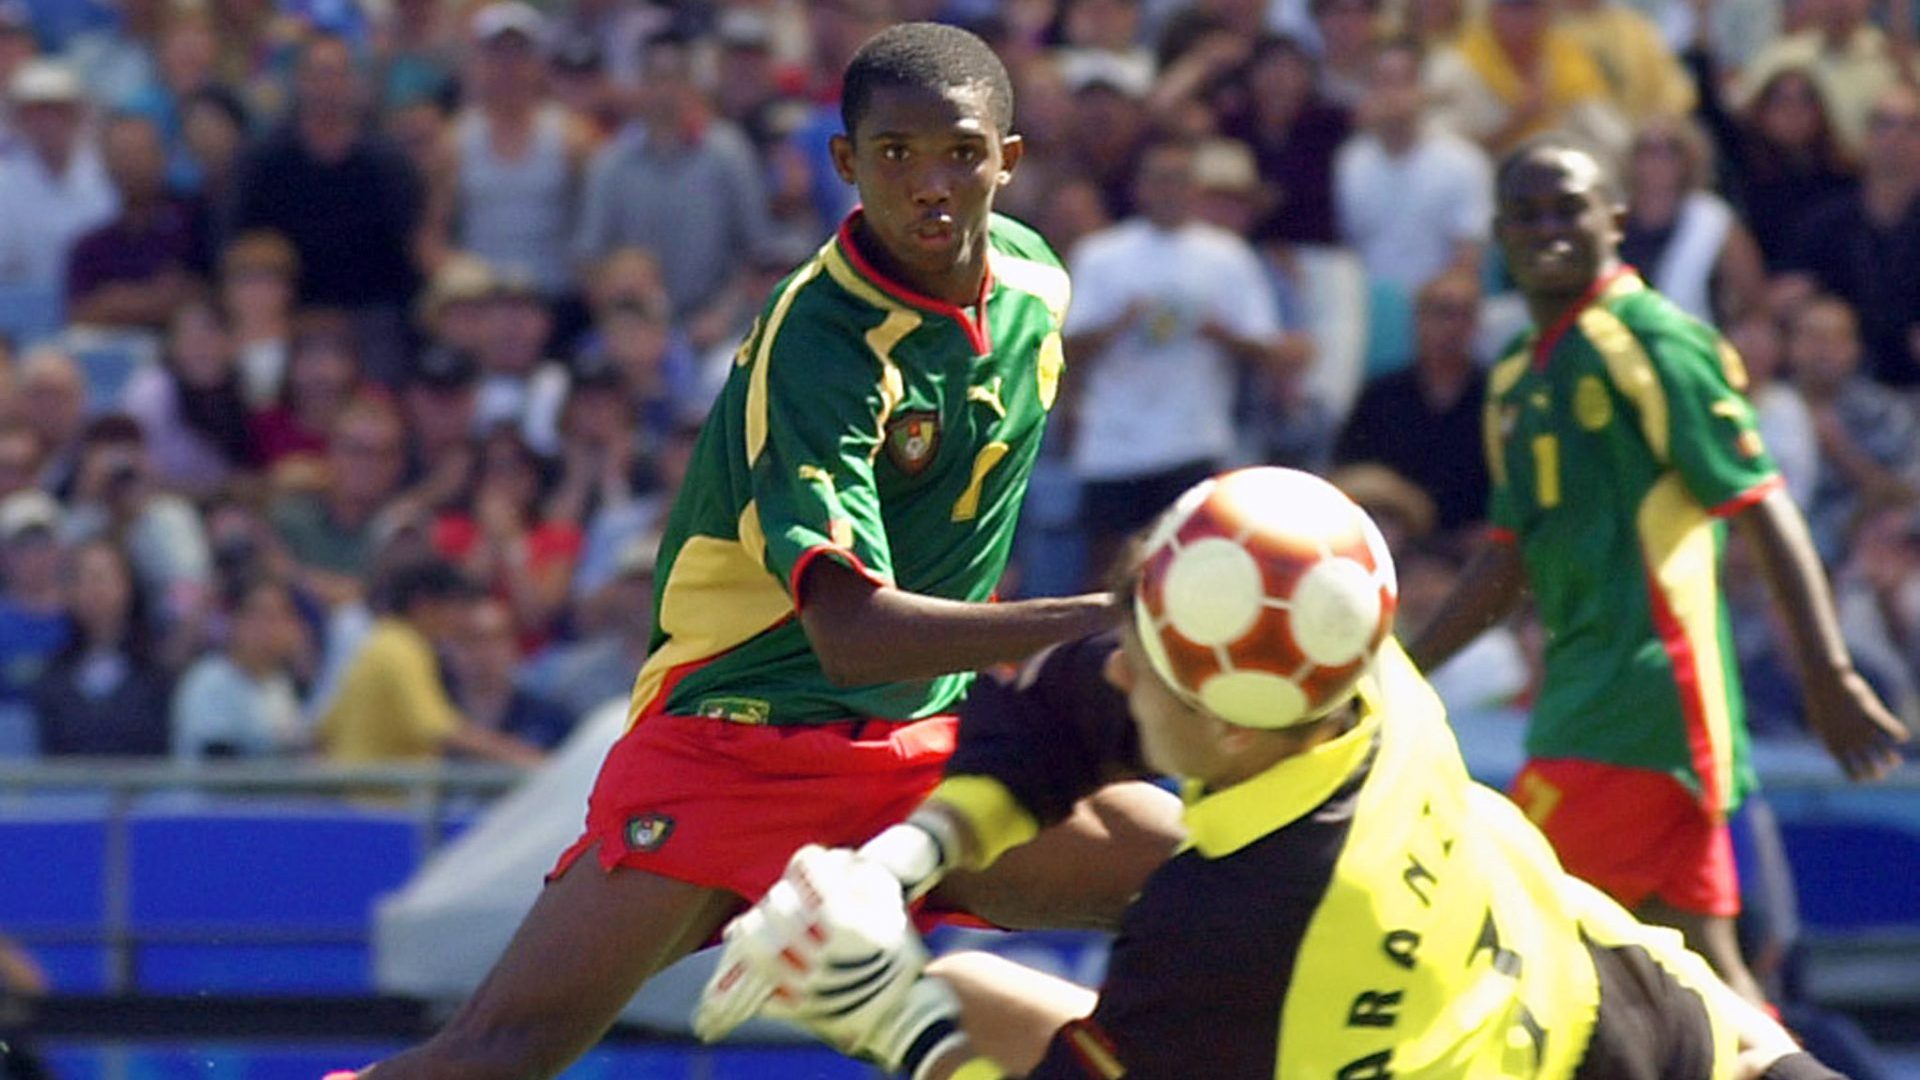 Cameroon's Samuel Eto'o scores against Spain as Cameroon win gold in the 2000 Olympic football final. Photo: Gabriel Bouys/Getty.